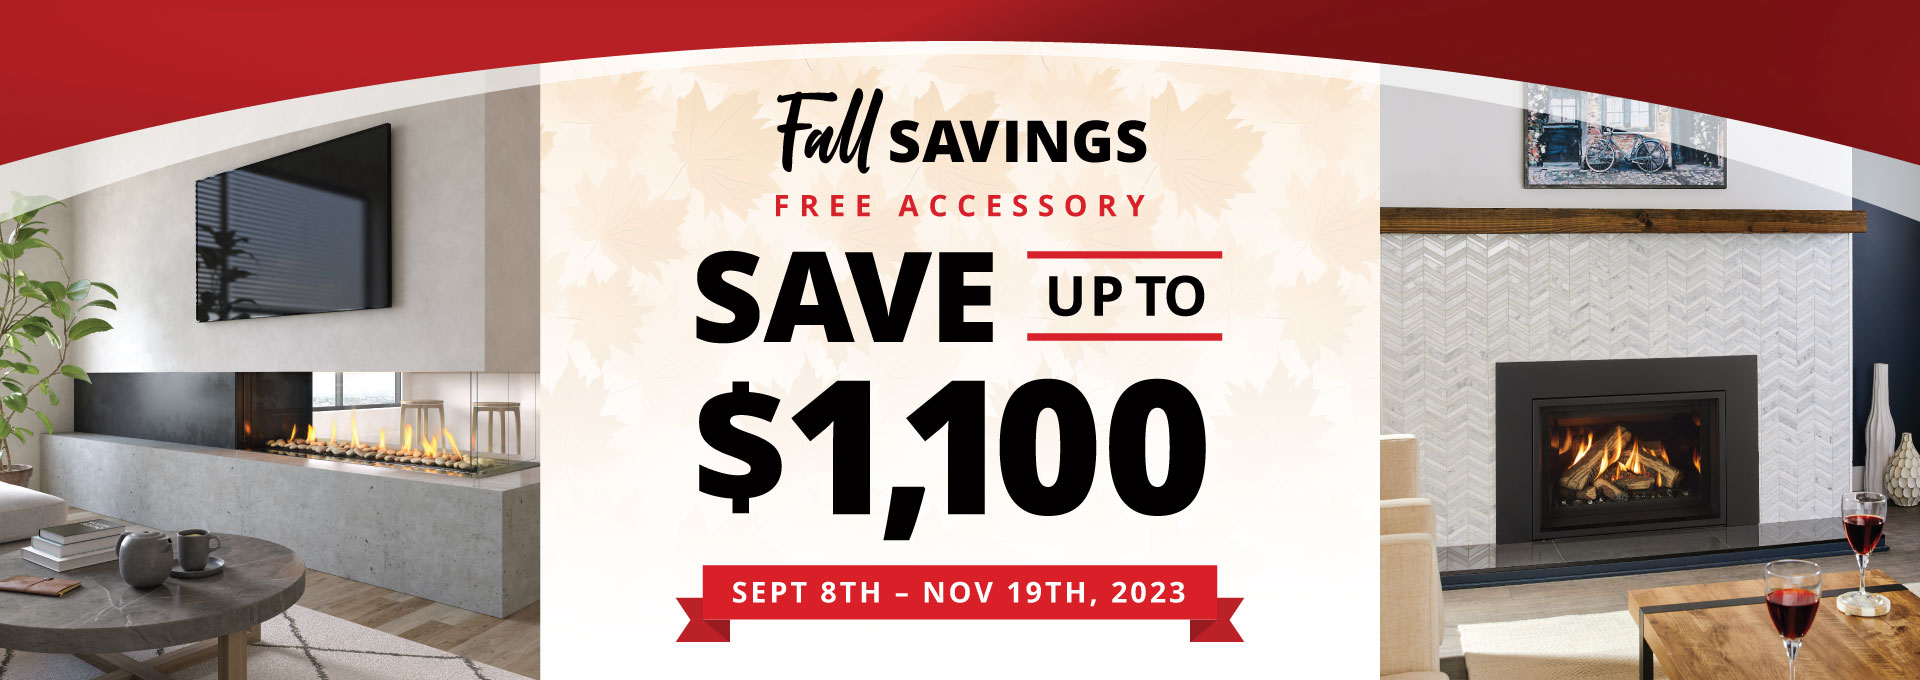 Save up to $1000 on Regency Fireplaces
From Sept 8th - Nov 19th, 2023